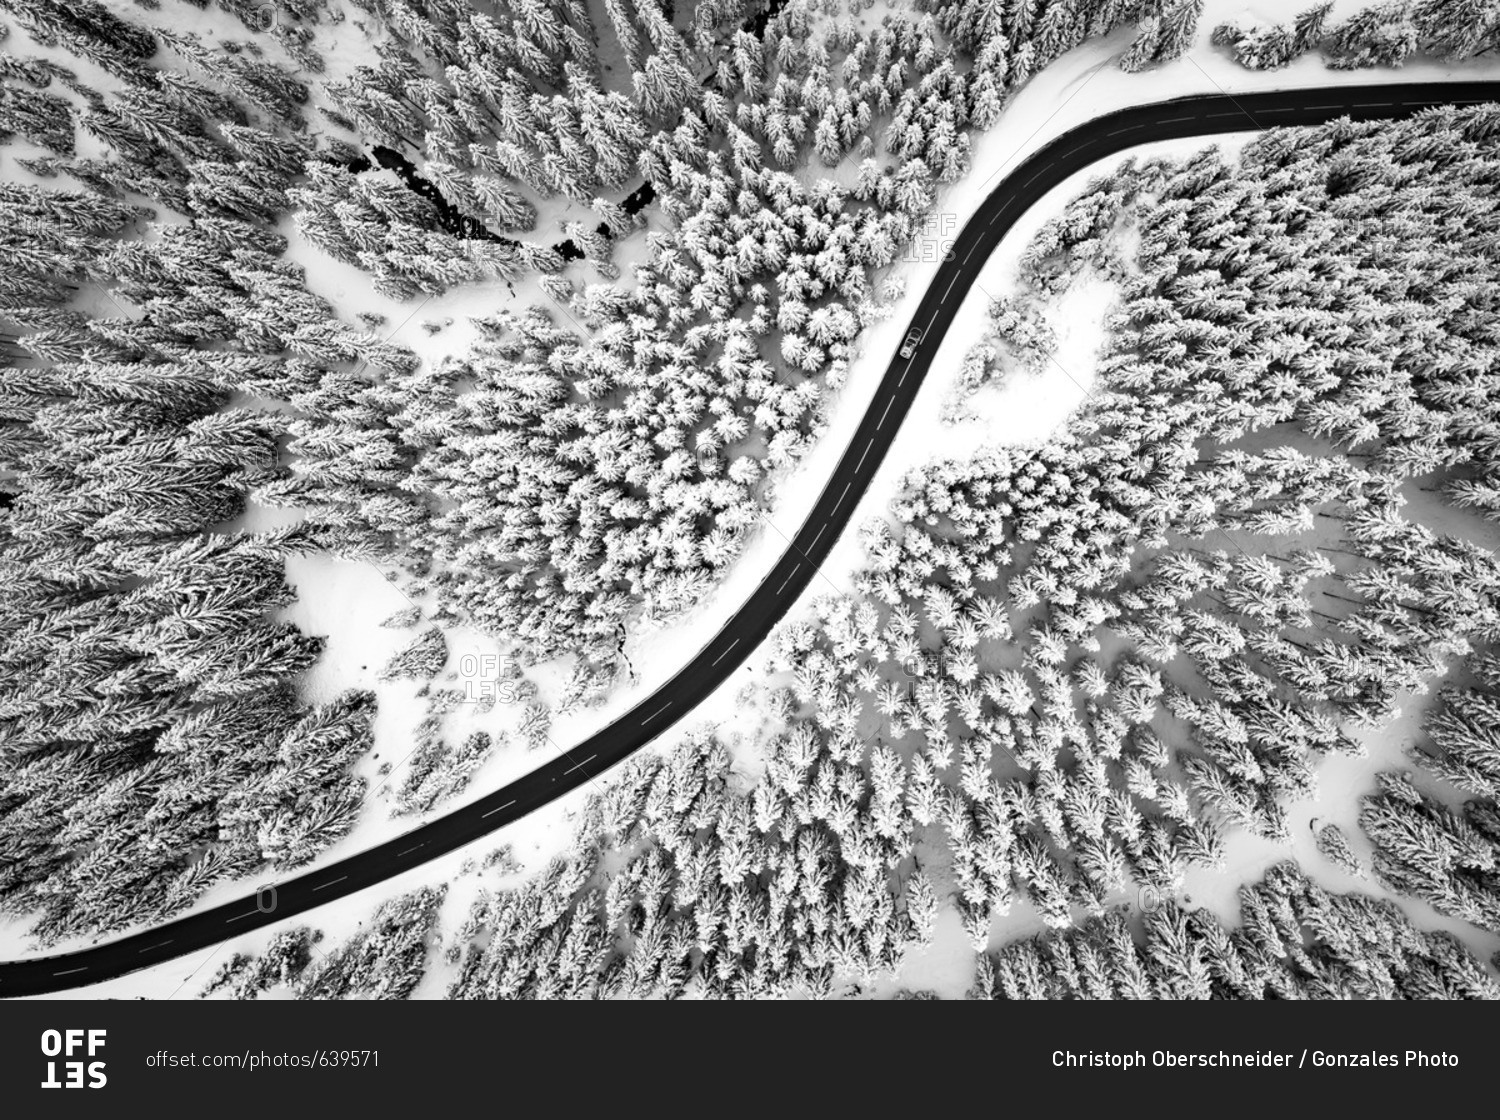 Zauchensee, Austria - April 20, 2017: Bird\'s eye view on a road winding through snow covered trees in the Austrian Alps